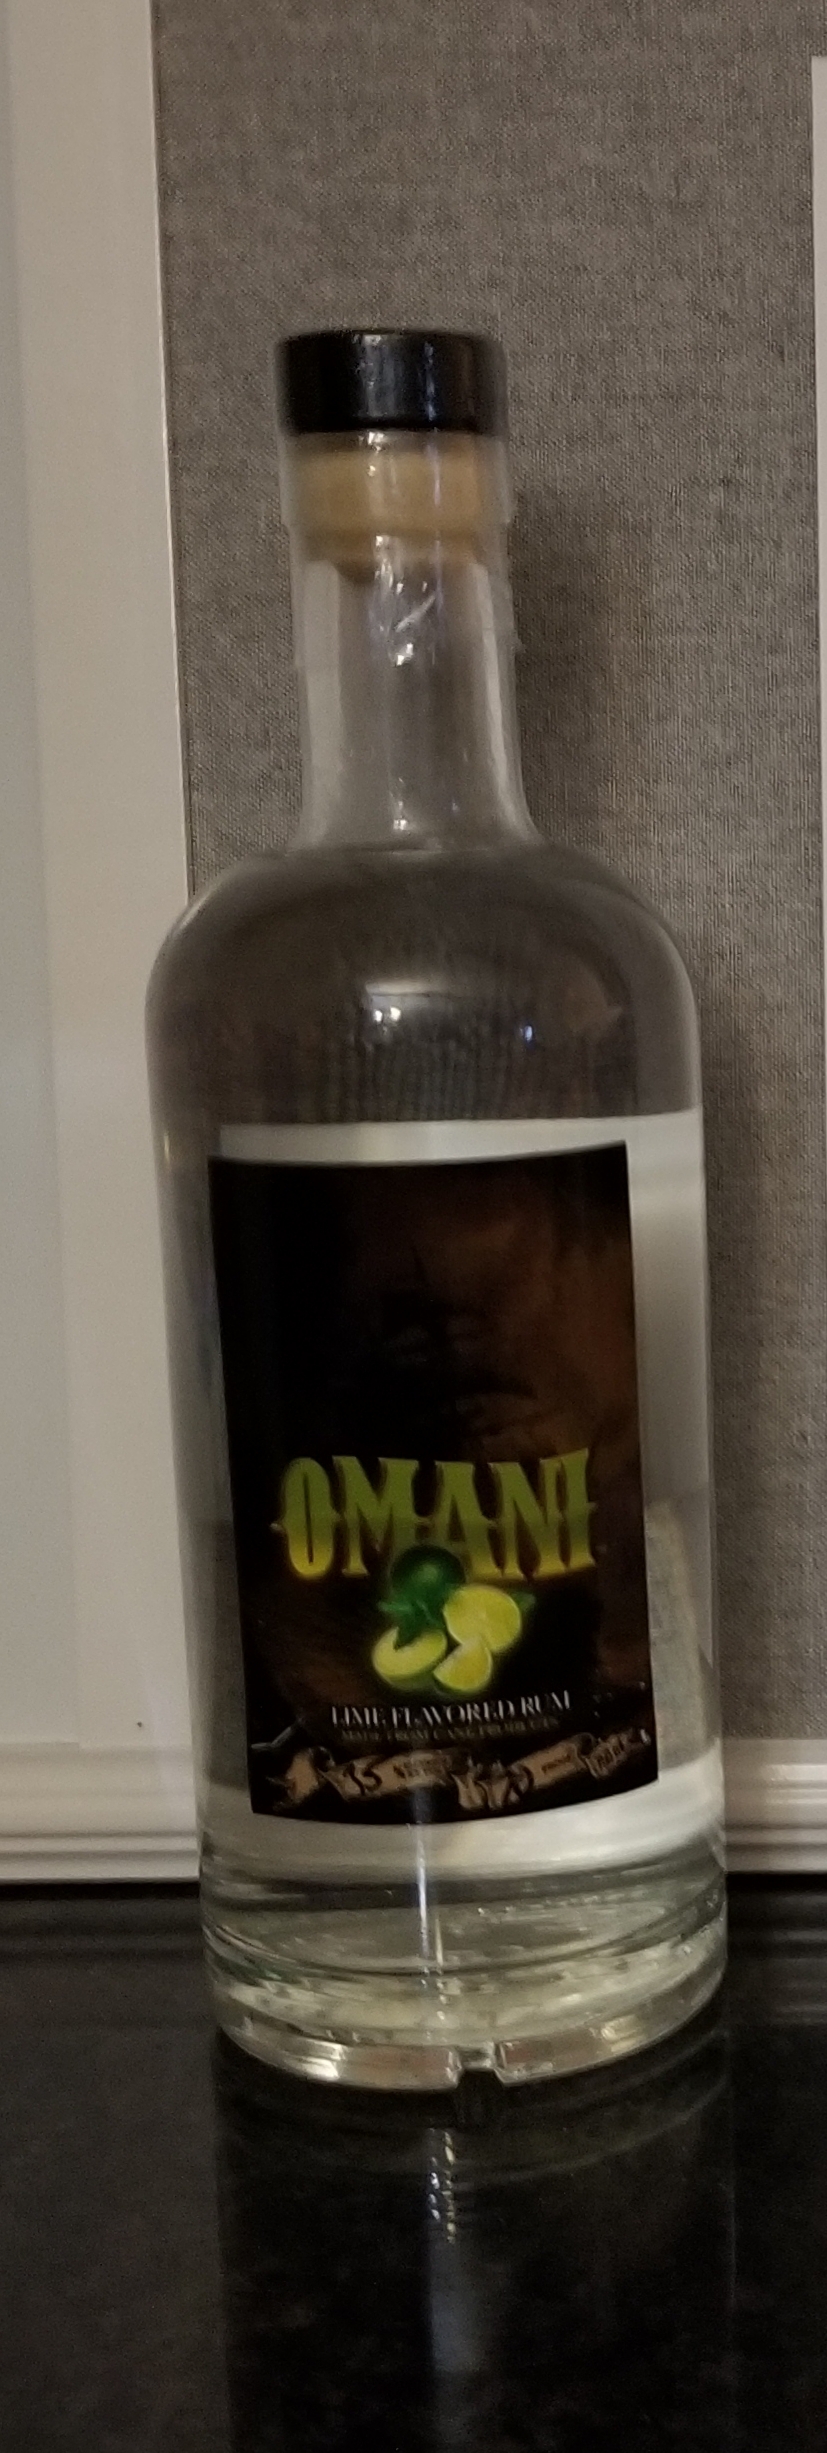 Omani Lime Flavored Rum from United States - Winner of Silver medal at ...